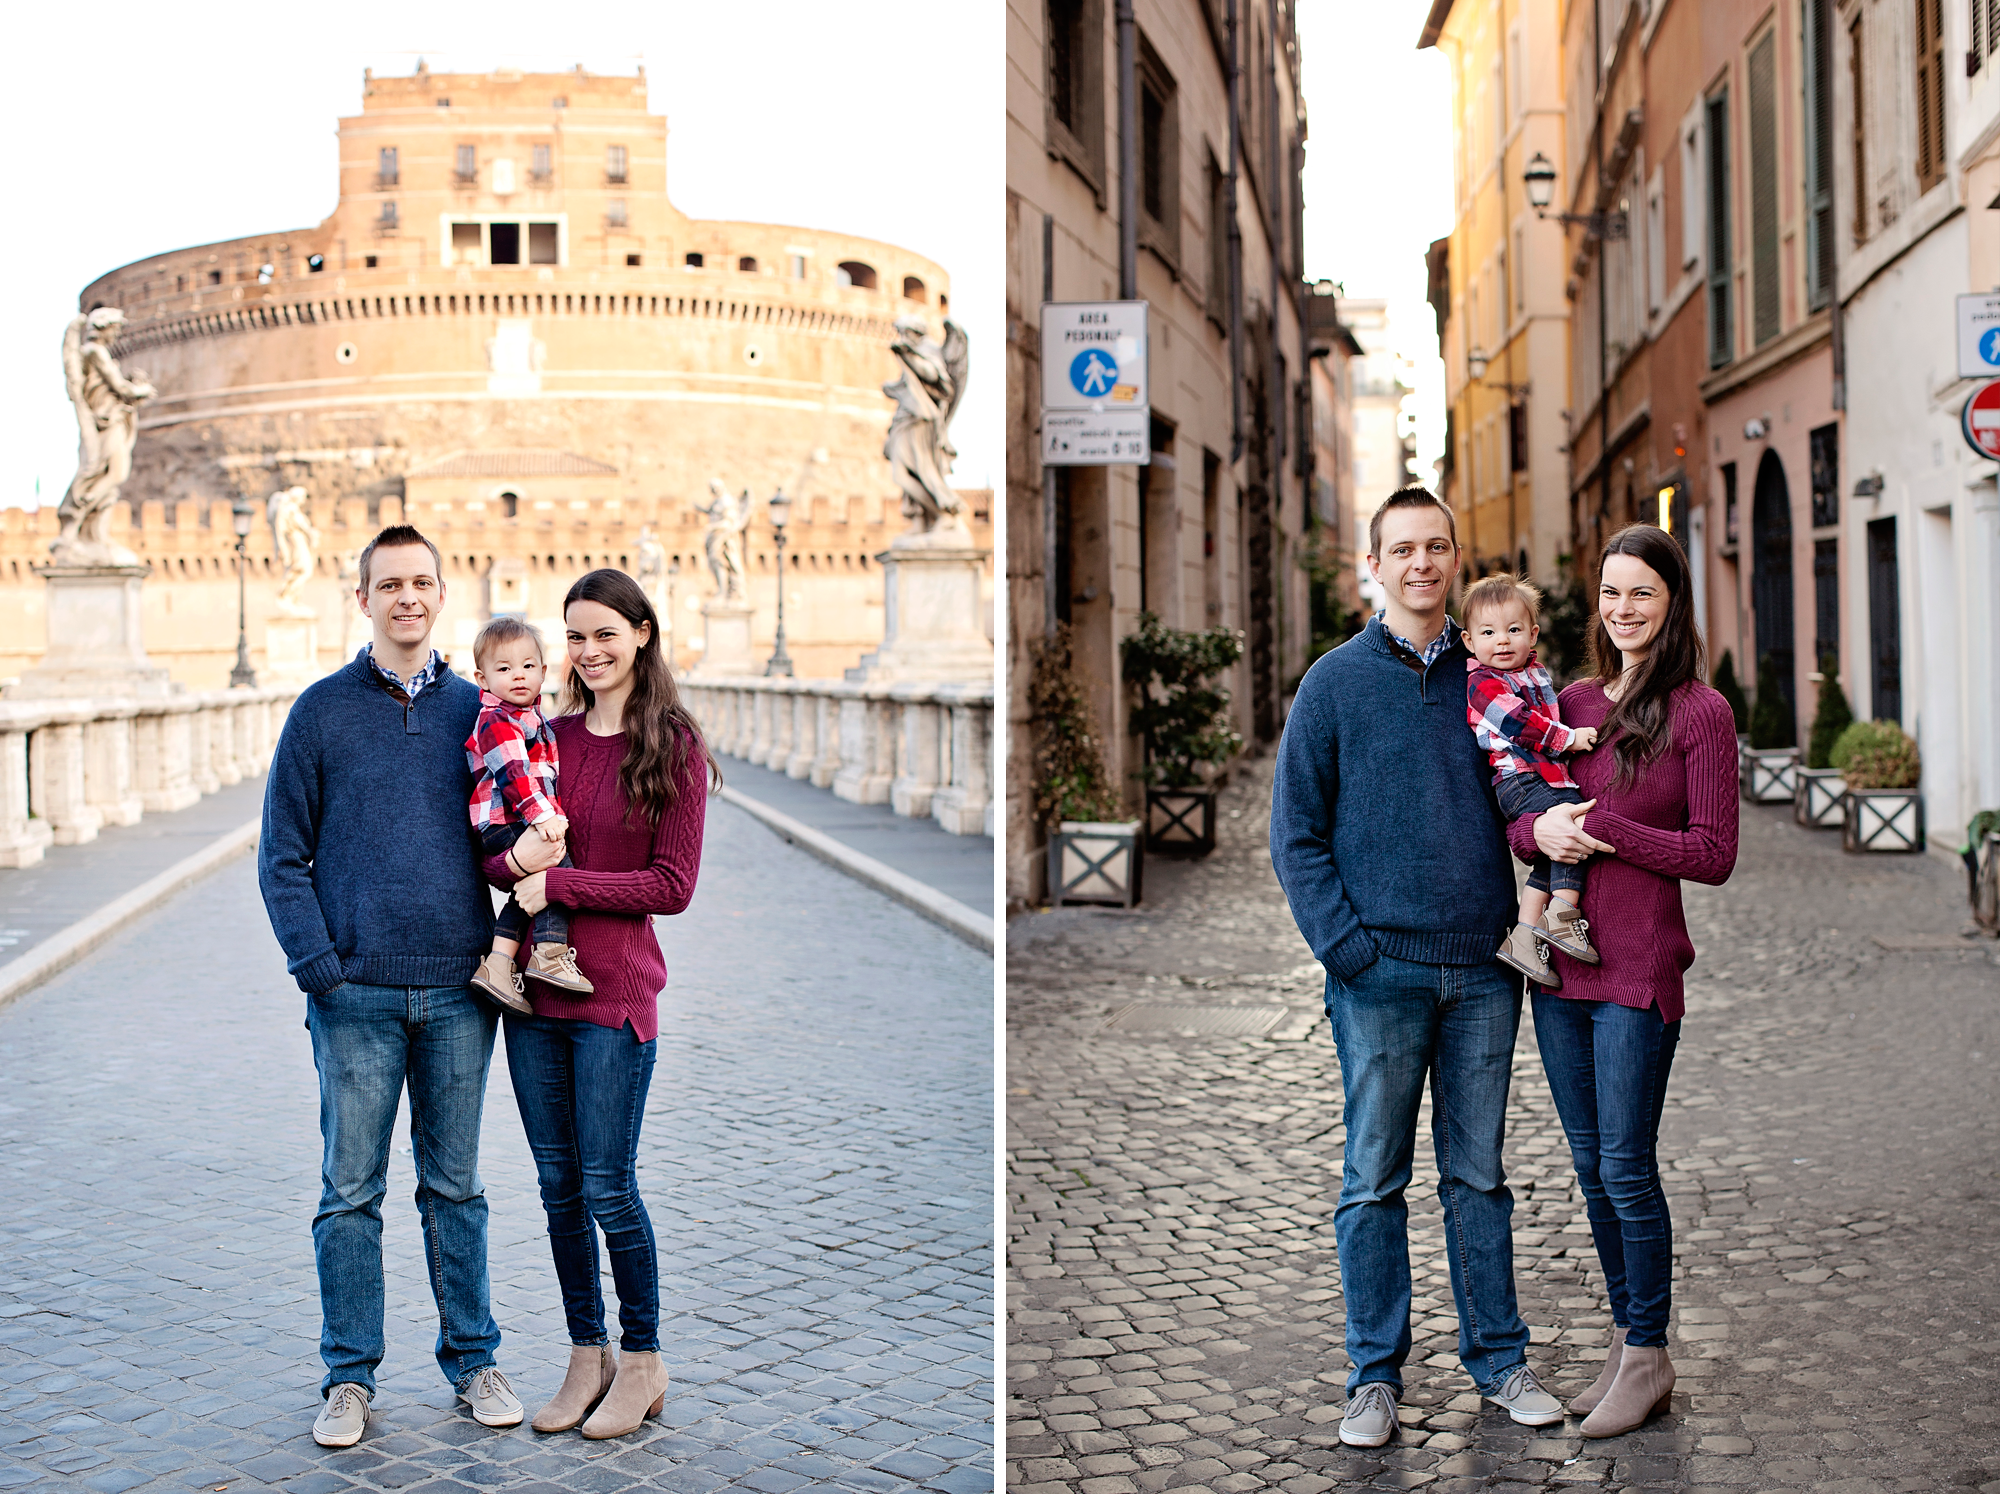 Honeymoon, vacation, family, engagement, maternity, wedding, love story individual and solo photoshoots in Rome, Italy by photographer Tricia Anne Photography | Rome Photographer, vacation, tripadvisor, instagram, fun, married, bride, groom, love, story, photography, session, photoshoot, wedding photographer, mywed, vacation photographer, engagement photo, honeymoon photoshoot, rome honeymoon, rome wedding, elopement in Rome, honeymoon photographer rome, Family Photo shoot Rome, Rome Family Photography, Rome Family Photographer, Vatican Photo shoot, Vatican Photography, Castle Sant’angelo photo shoot, Rome doors